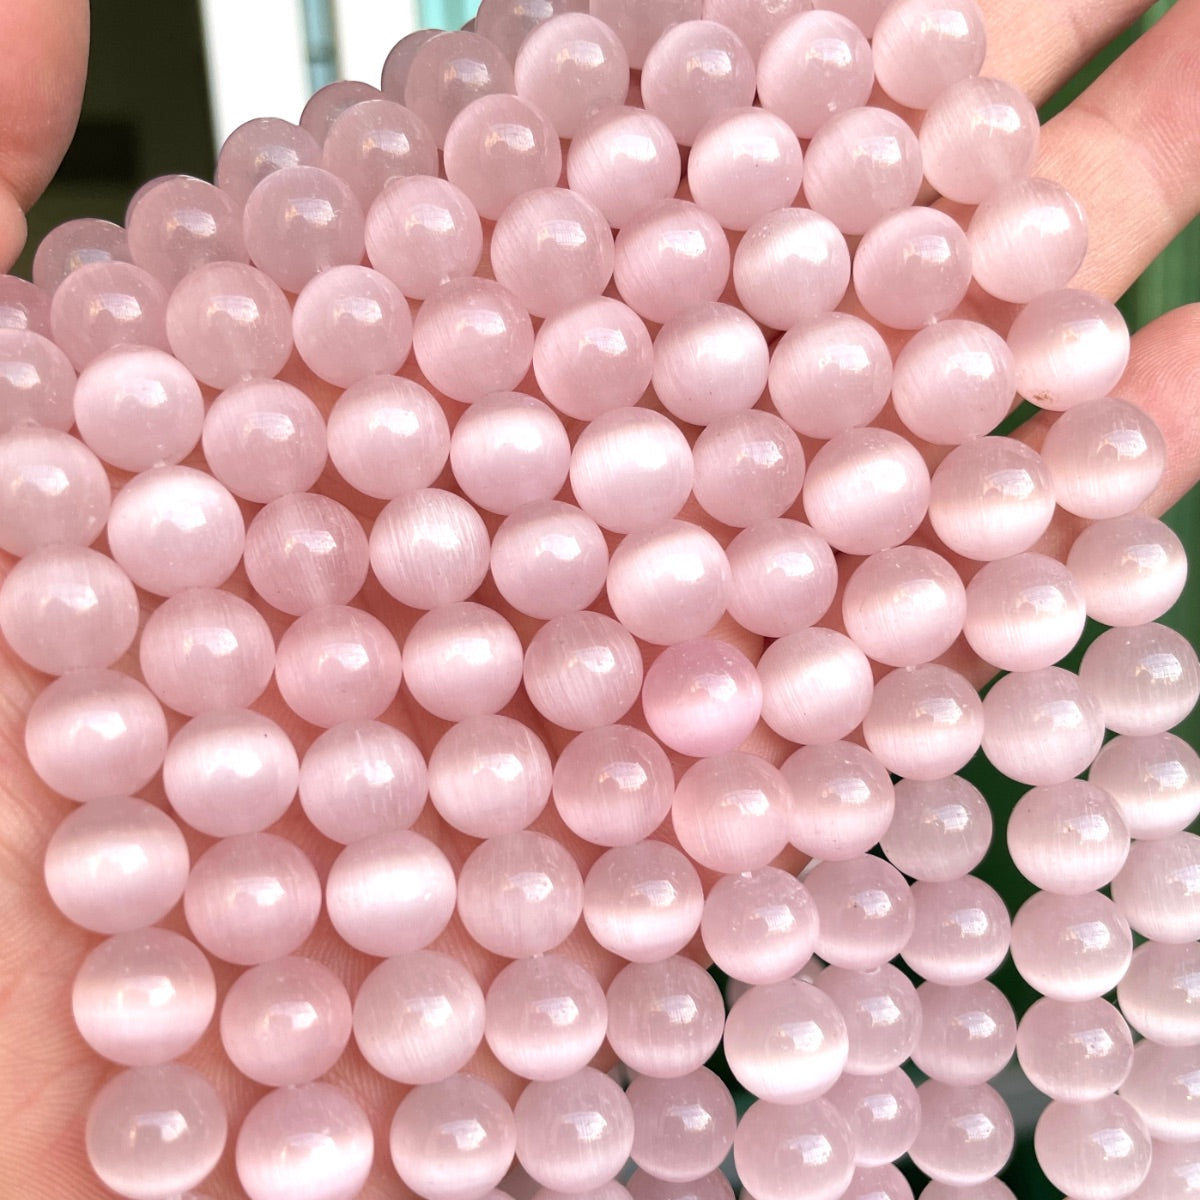 2 Strands/Lot 10mm Natural Light Pink Cat's Eye Opal Stone Round Beads Stone Beads Breast Cancer Awareness Cat's Eye Beads New Beads Arrivals Charms Beads Beyond